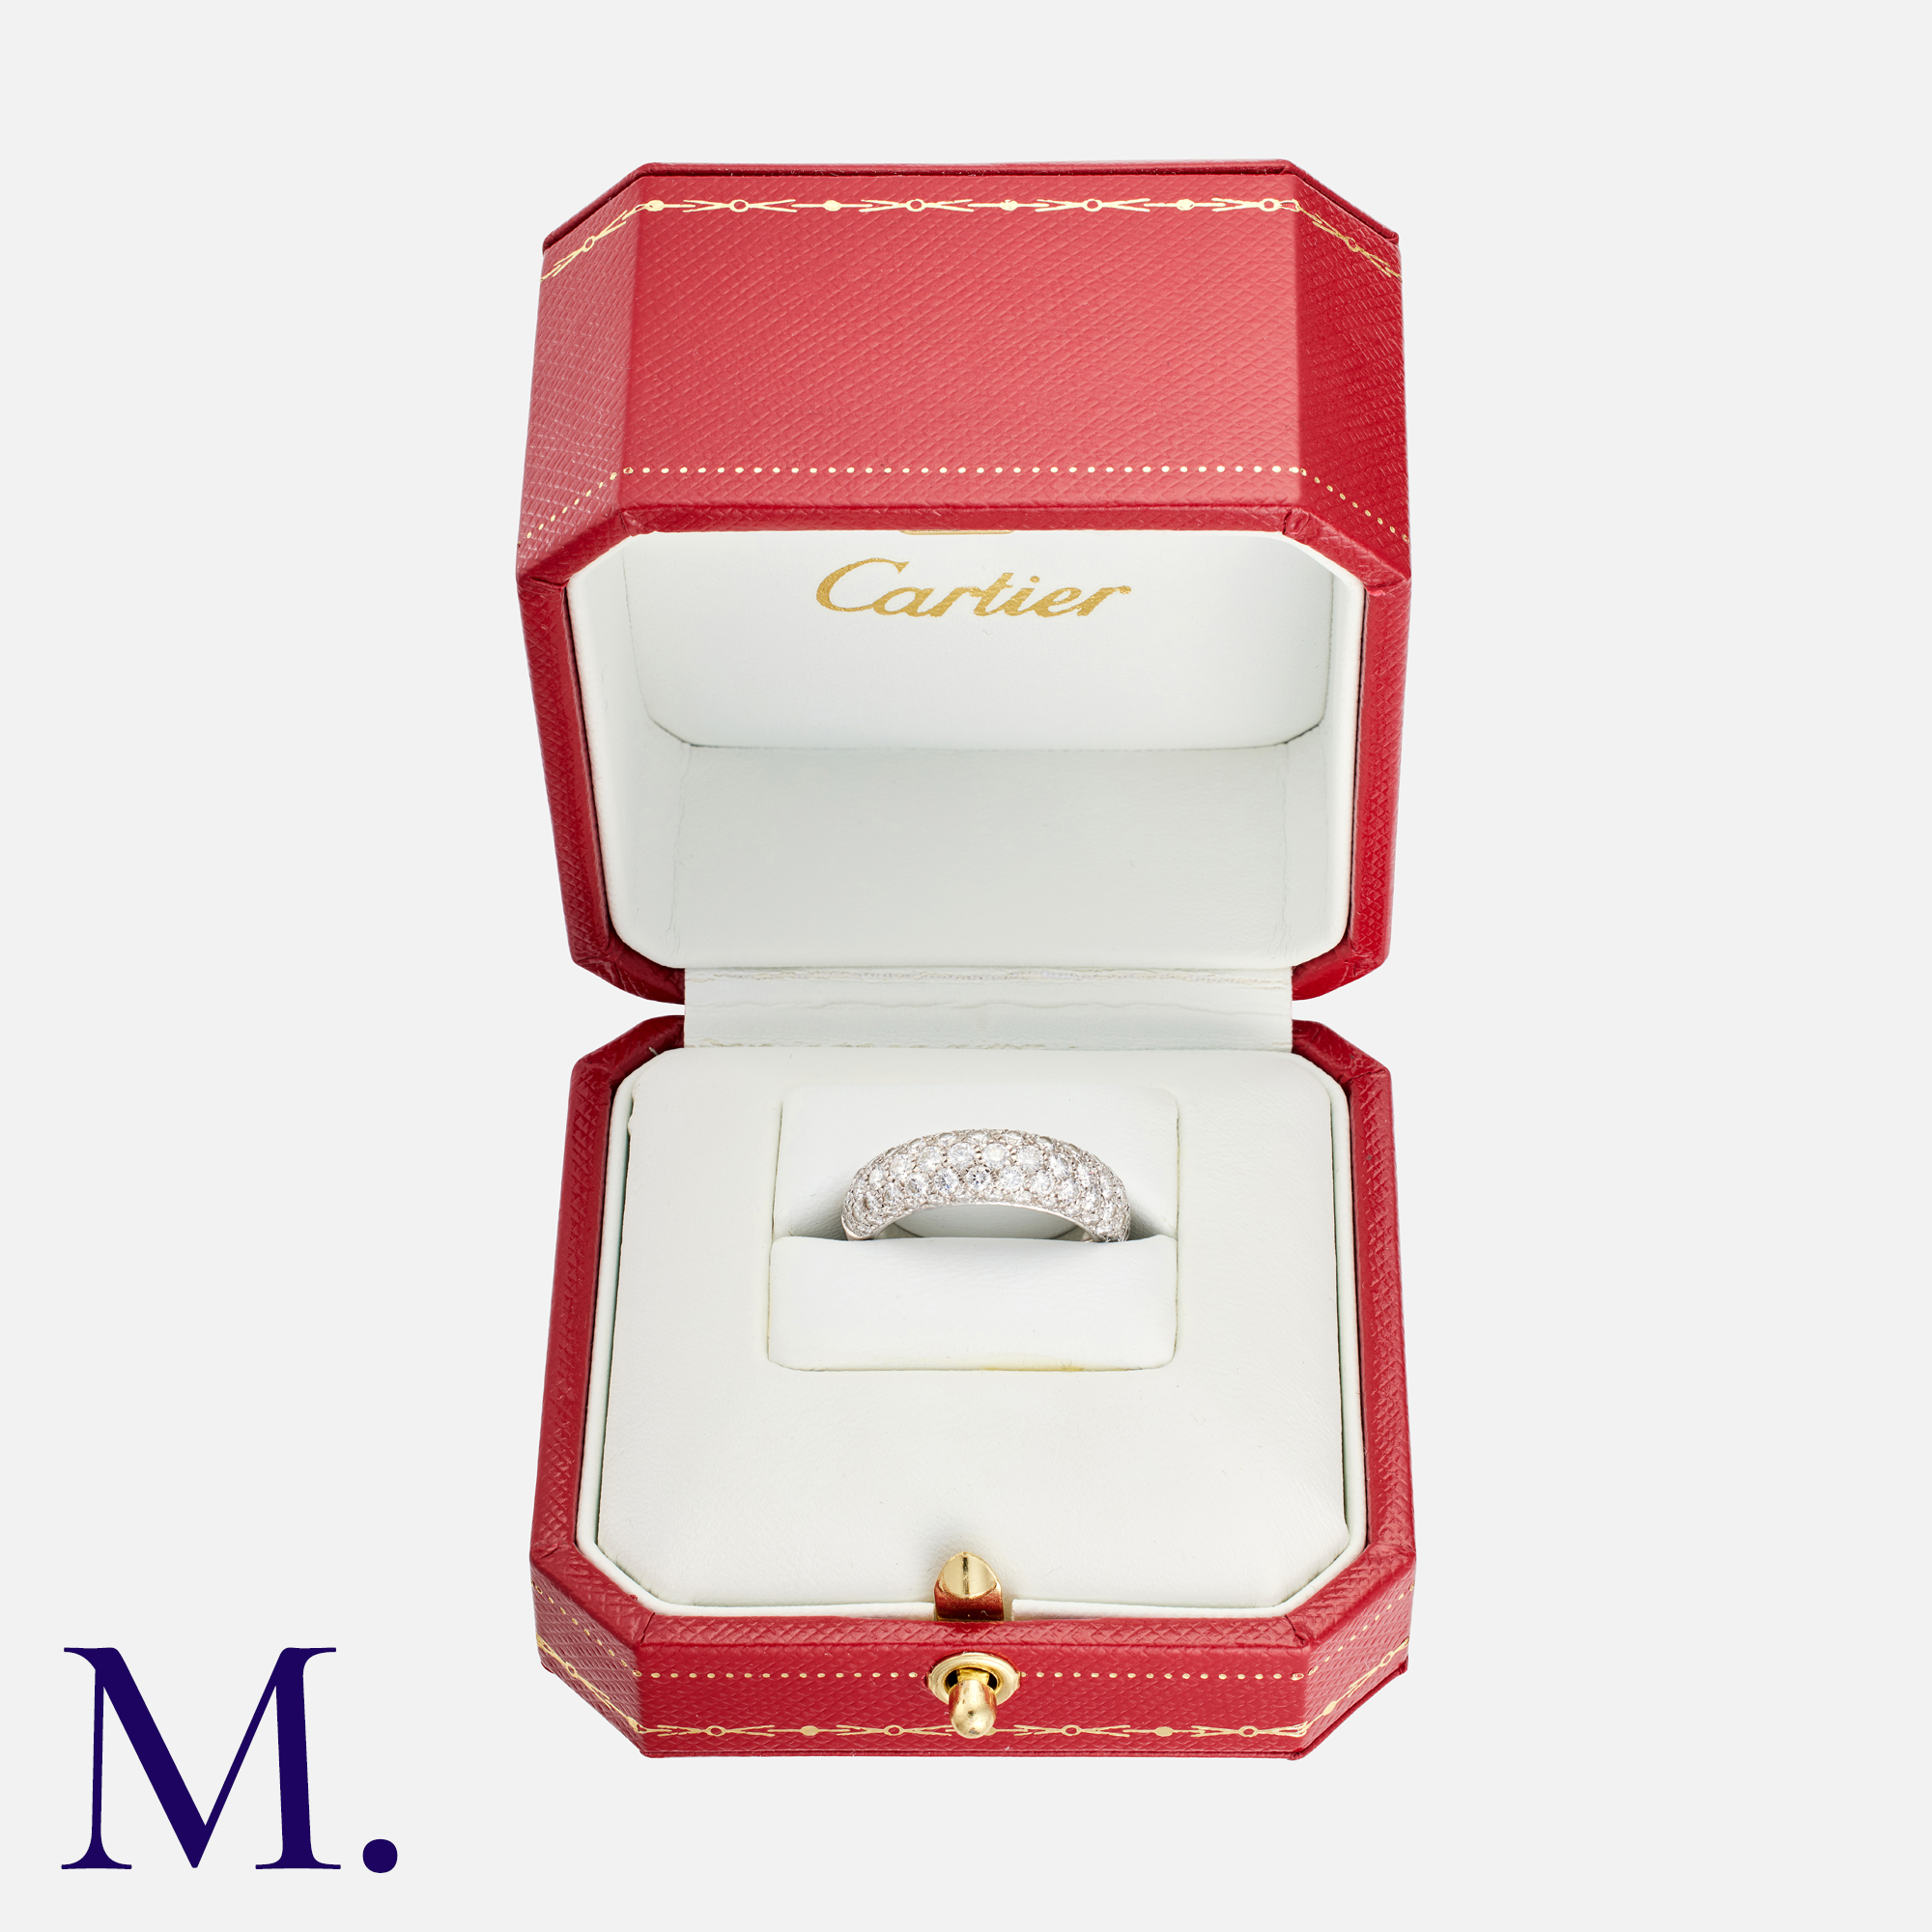 CARTIER. A Diamond Ring in 18K white gold, set with 68 round cut diamonds, In original box and outer - Image 3 of 4